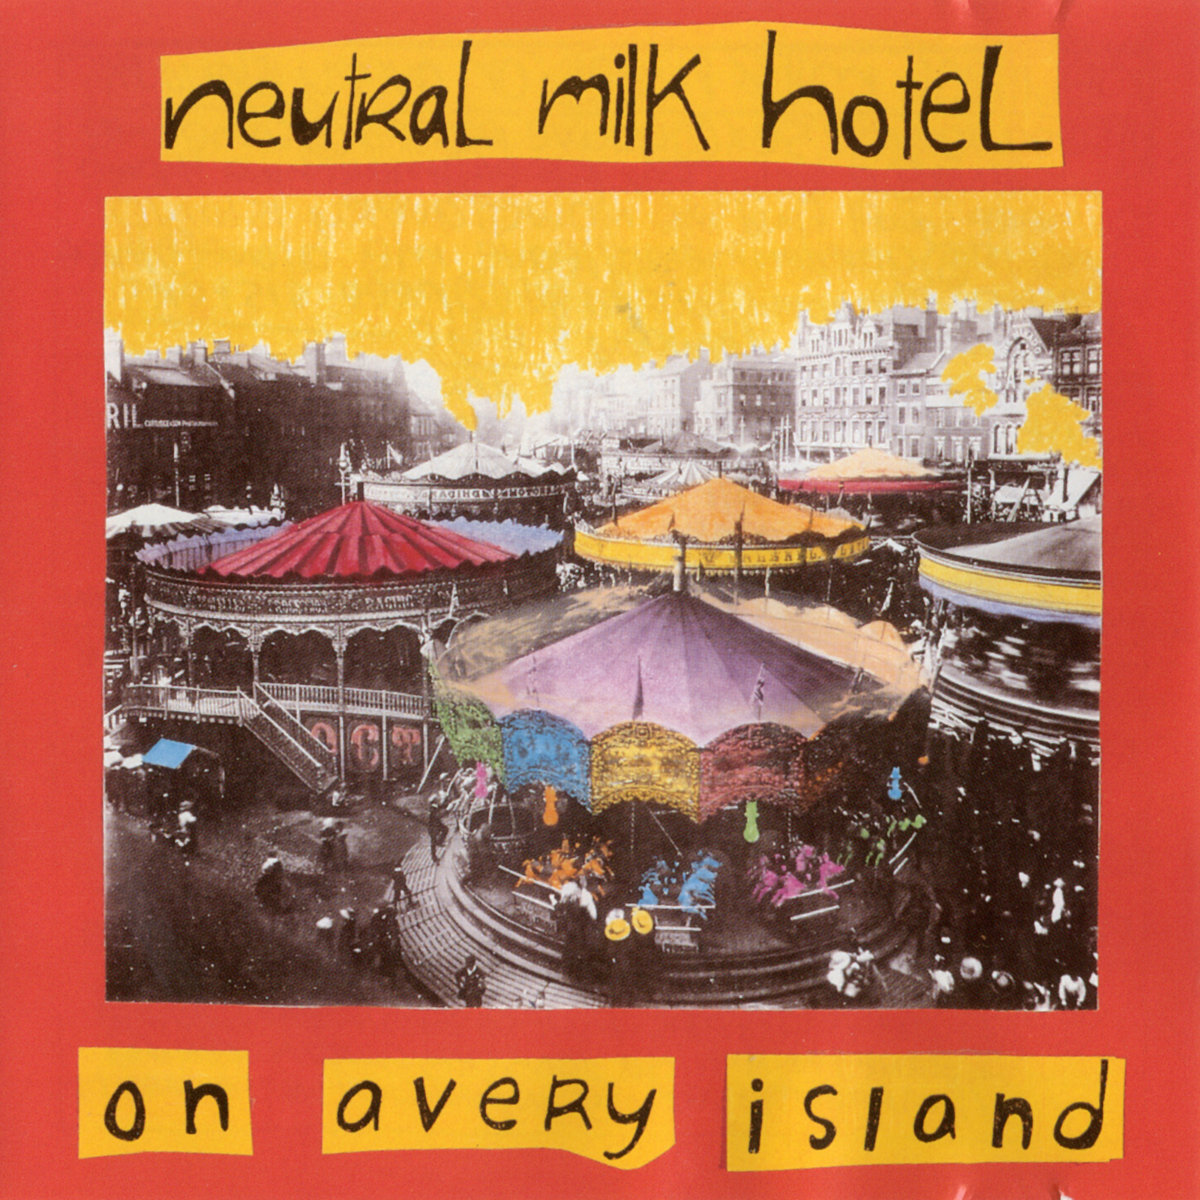 The album cover for Neutral Milk Hotel's On Avery Island